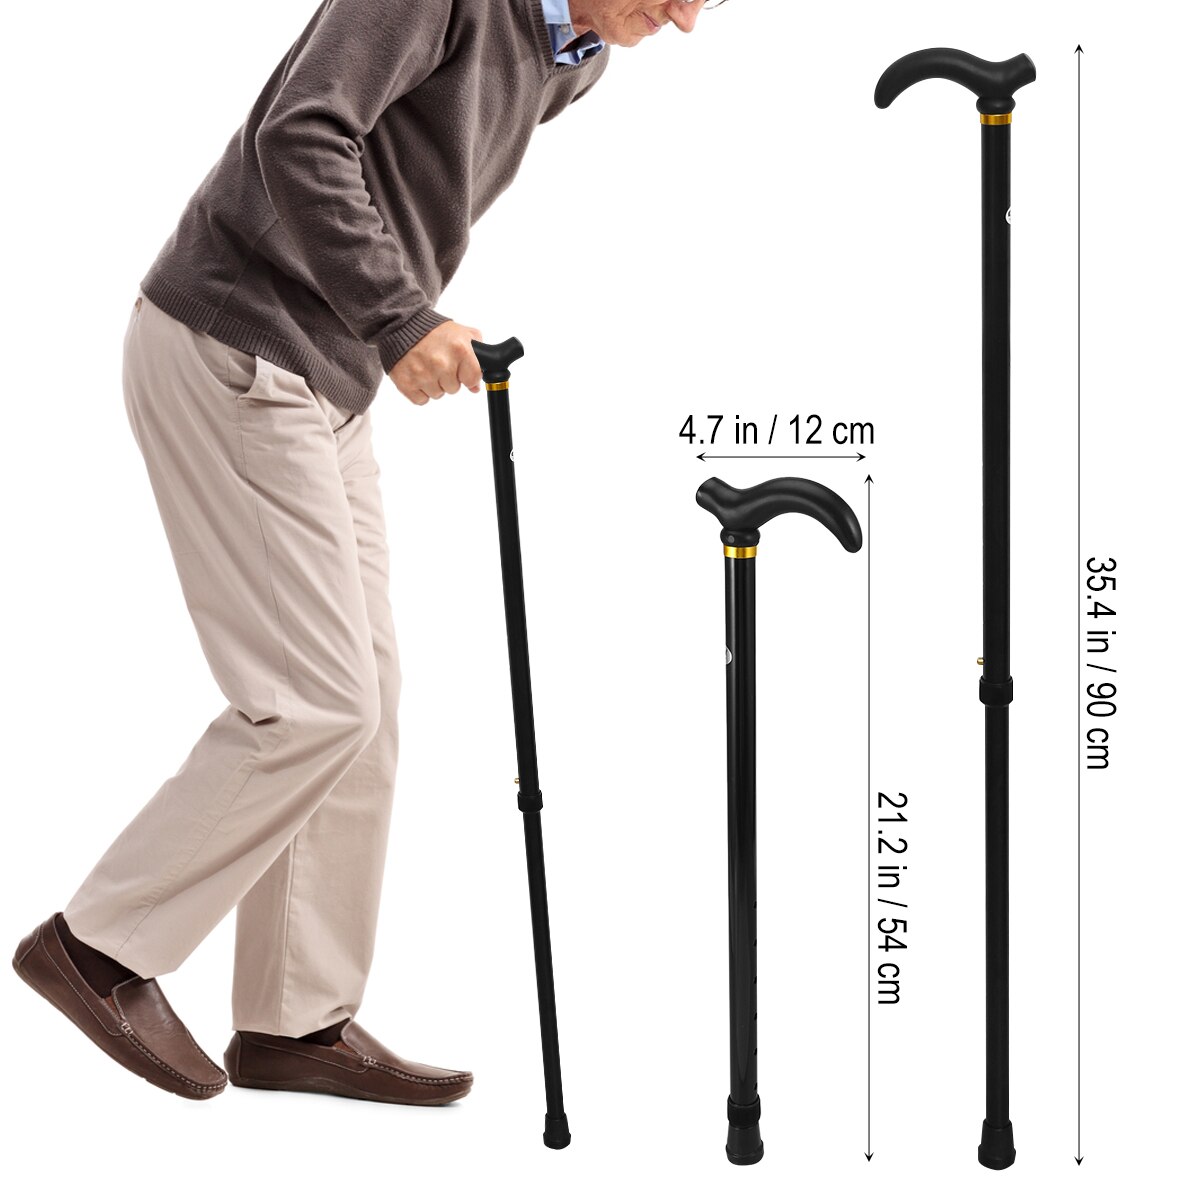 Aluminum Alloy Retractable Walking Stick 2 Section Telescopic Adjustable Height Cane Anti-skid Walking Stick for Old People